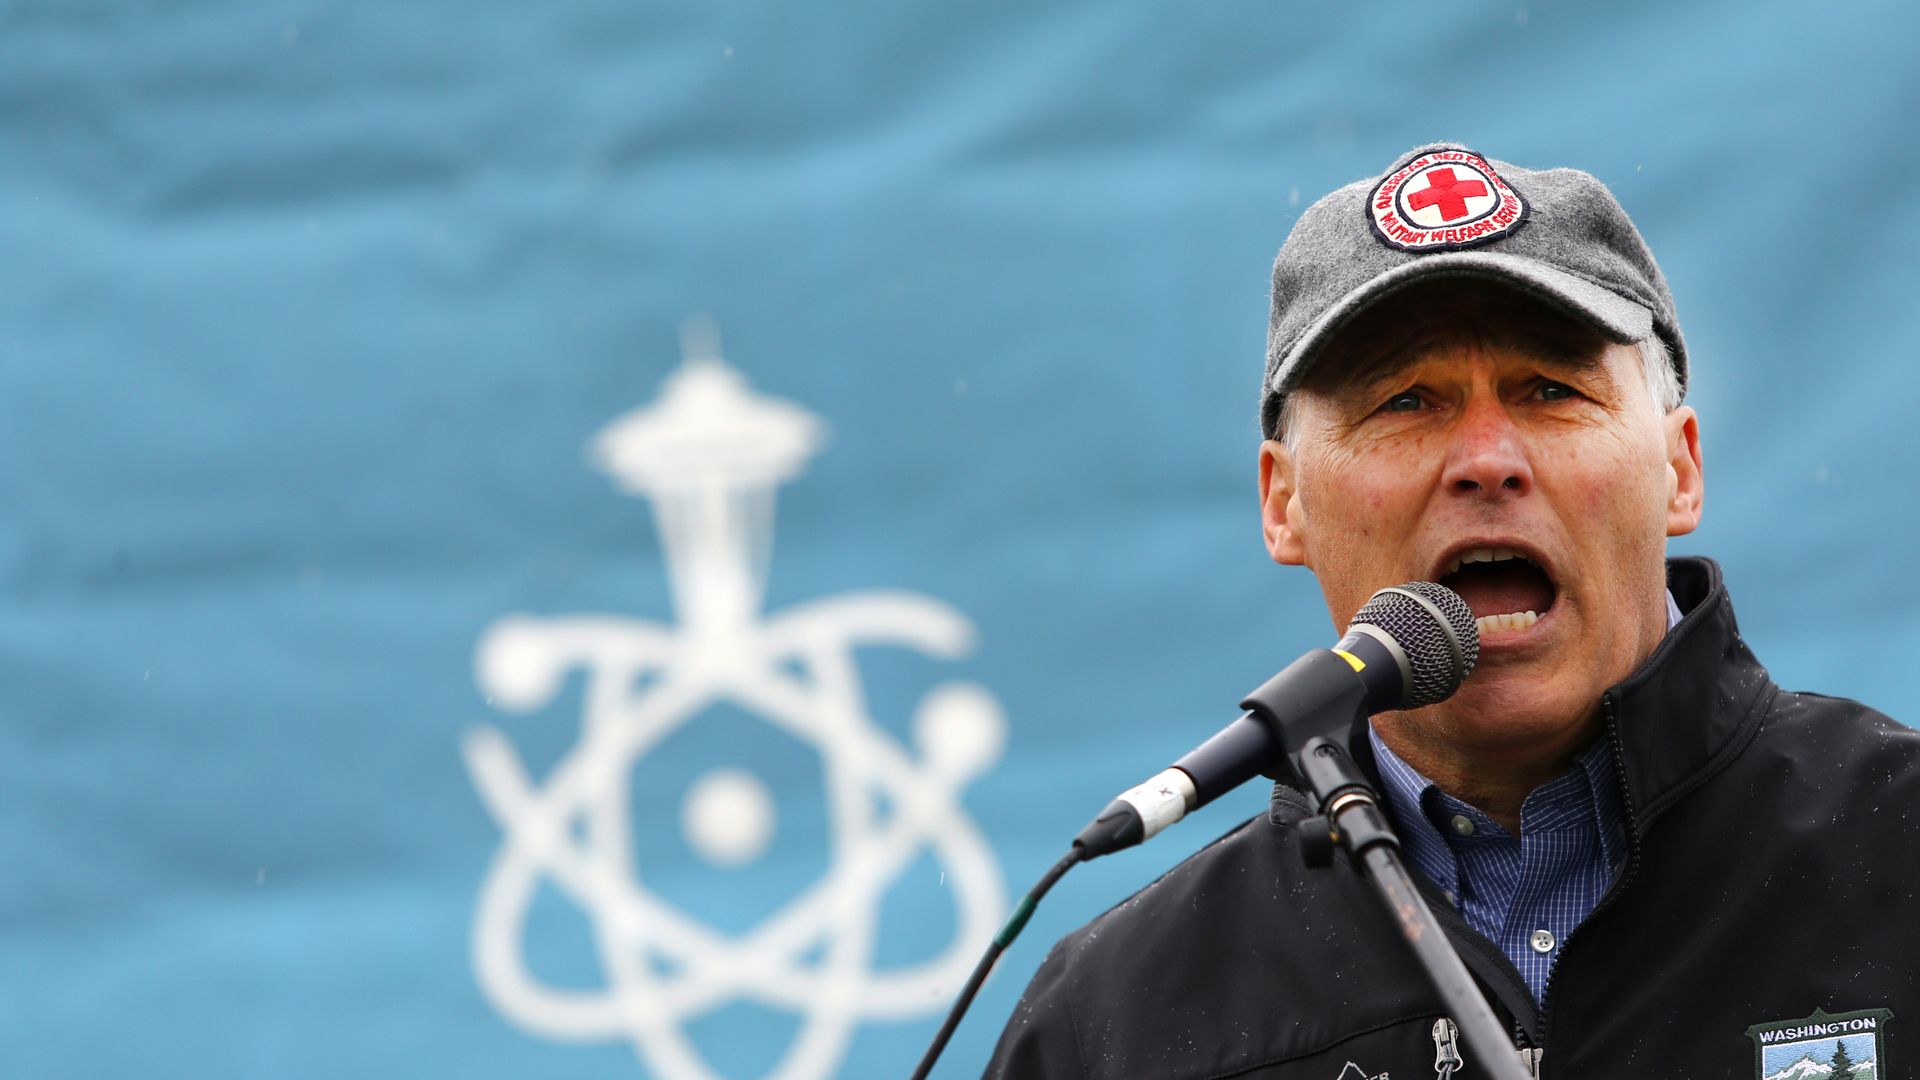 Washington Gov. Jay Inslee at a March for Science rally